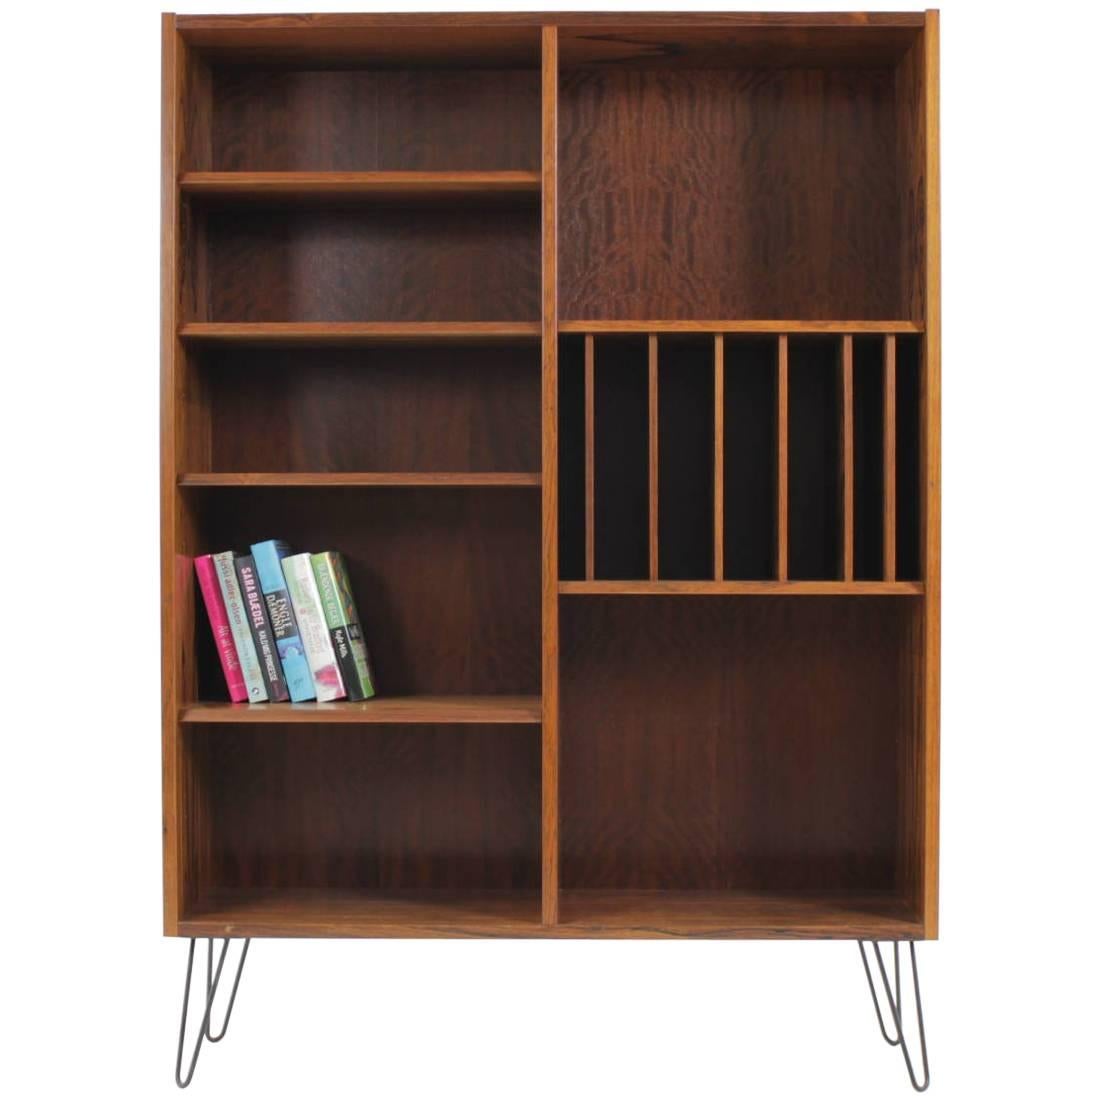 This bookcase was carefully restored. The hairpin iron legs were added afterwards. All shelves are adjustable.